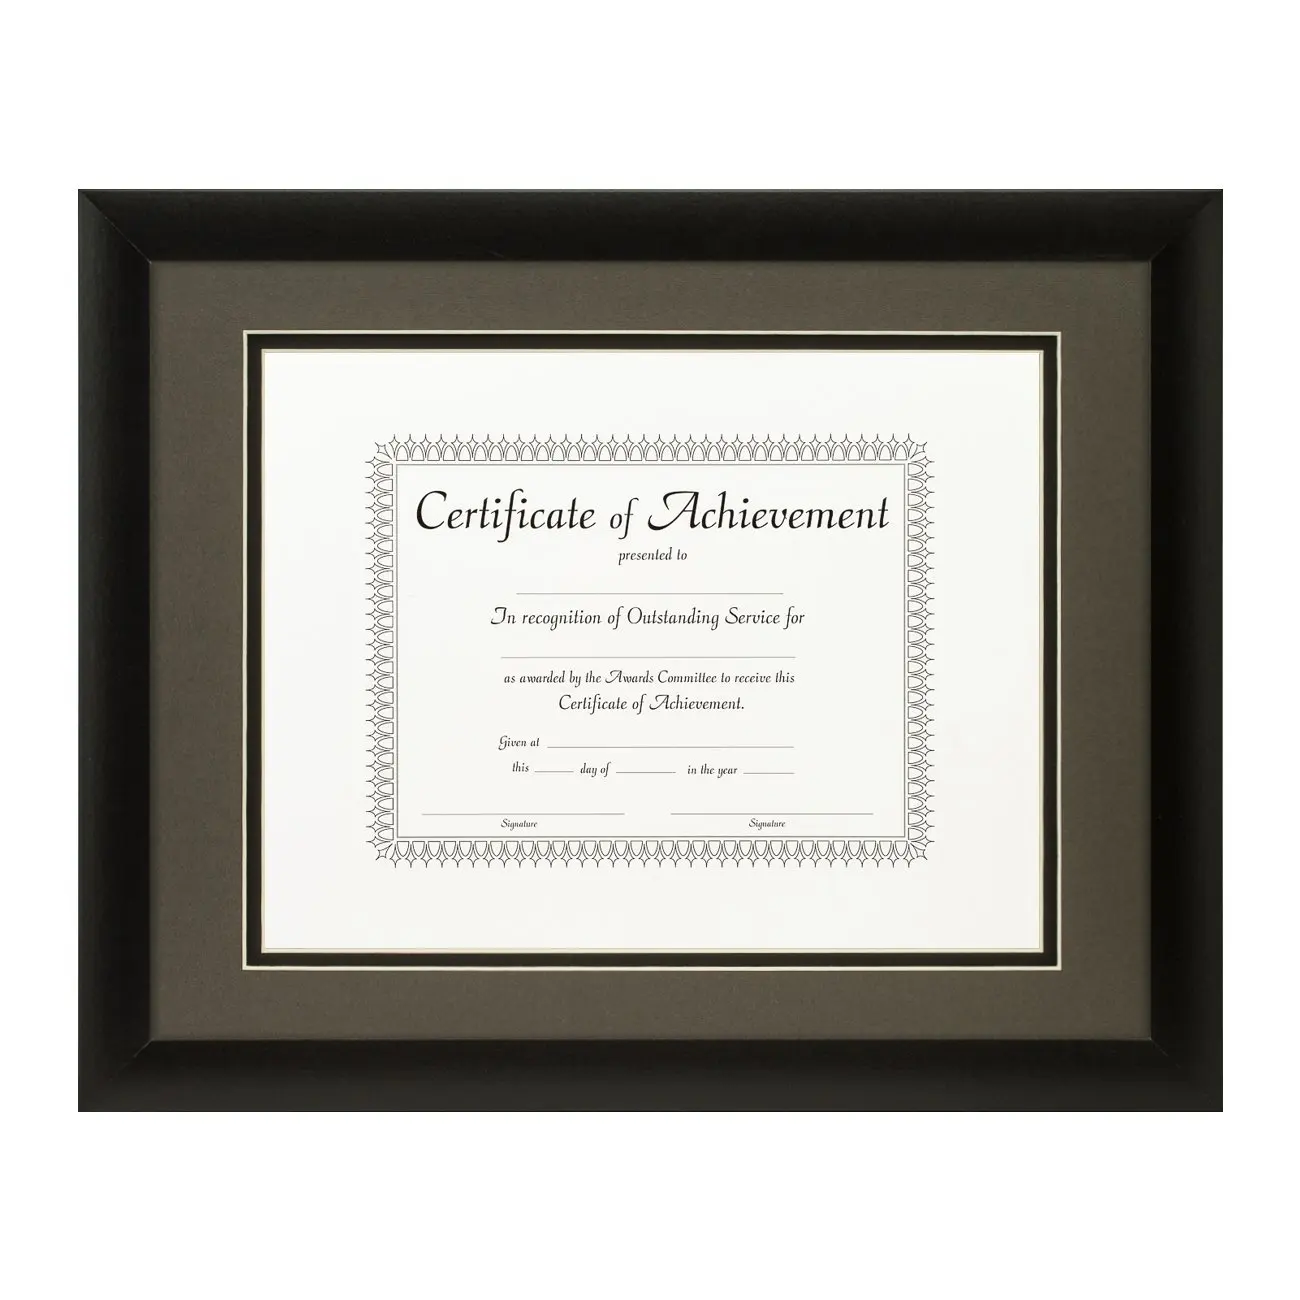 19.99. Craig Frames 11x14-Inch Black Document Frame, Double Mat with Single...